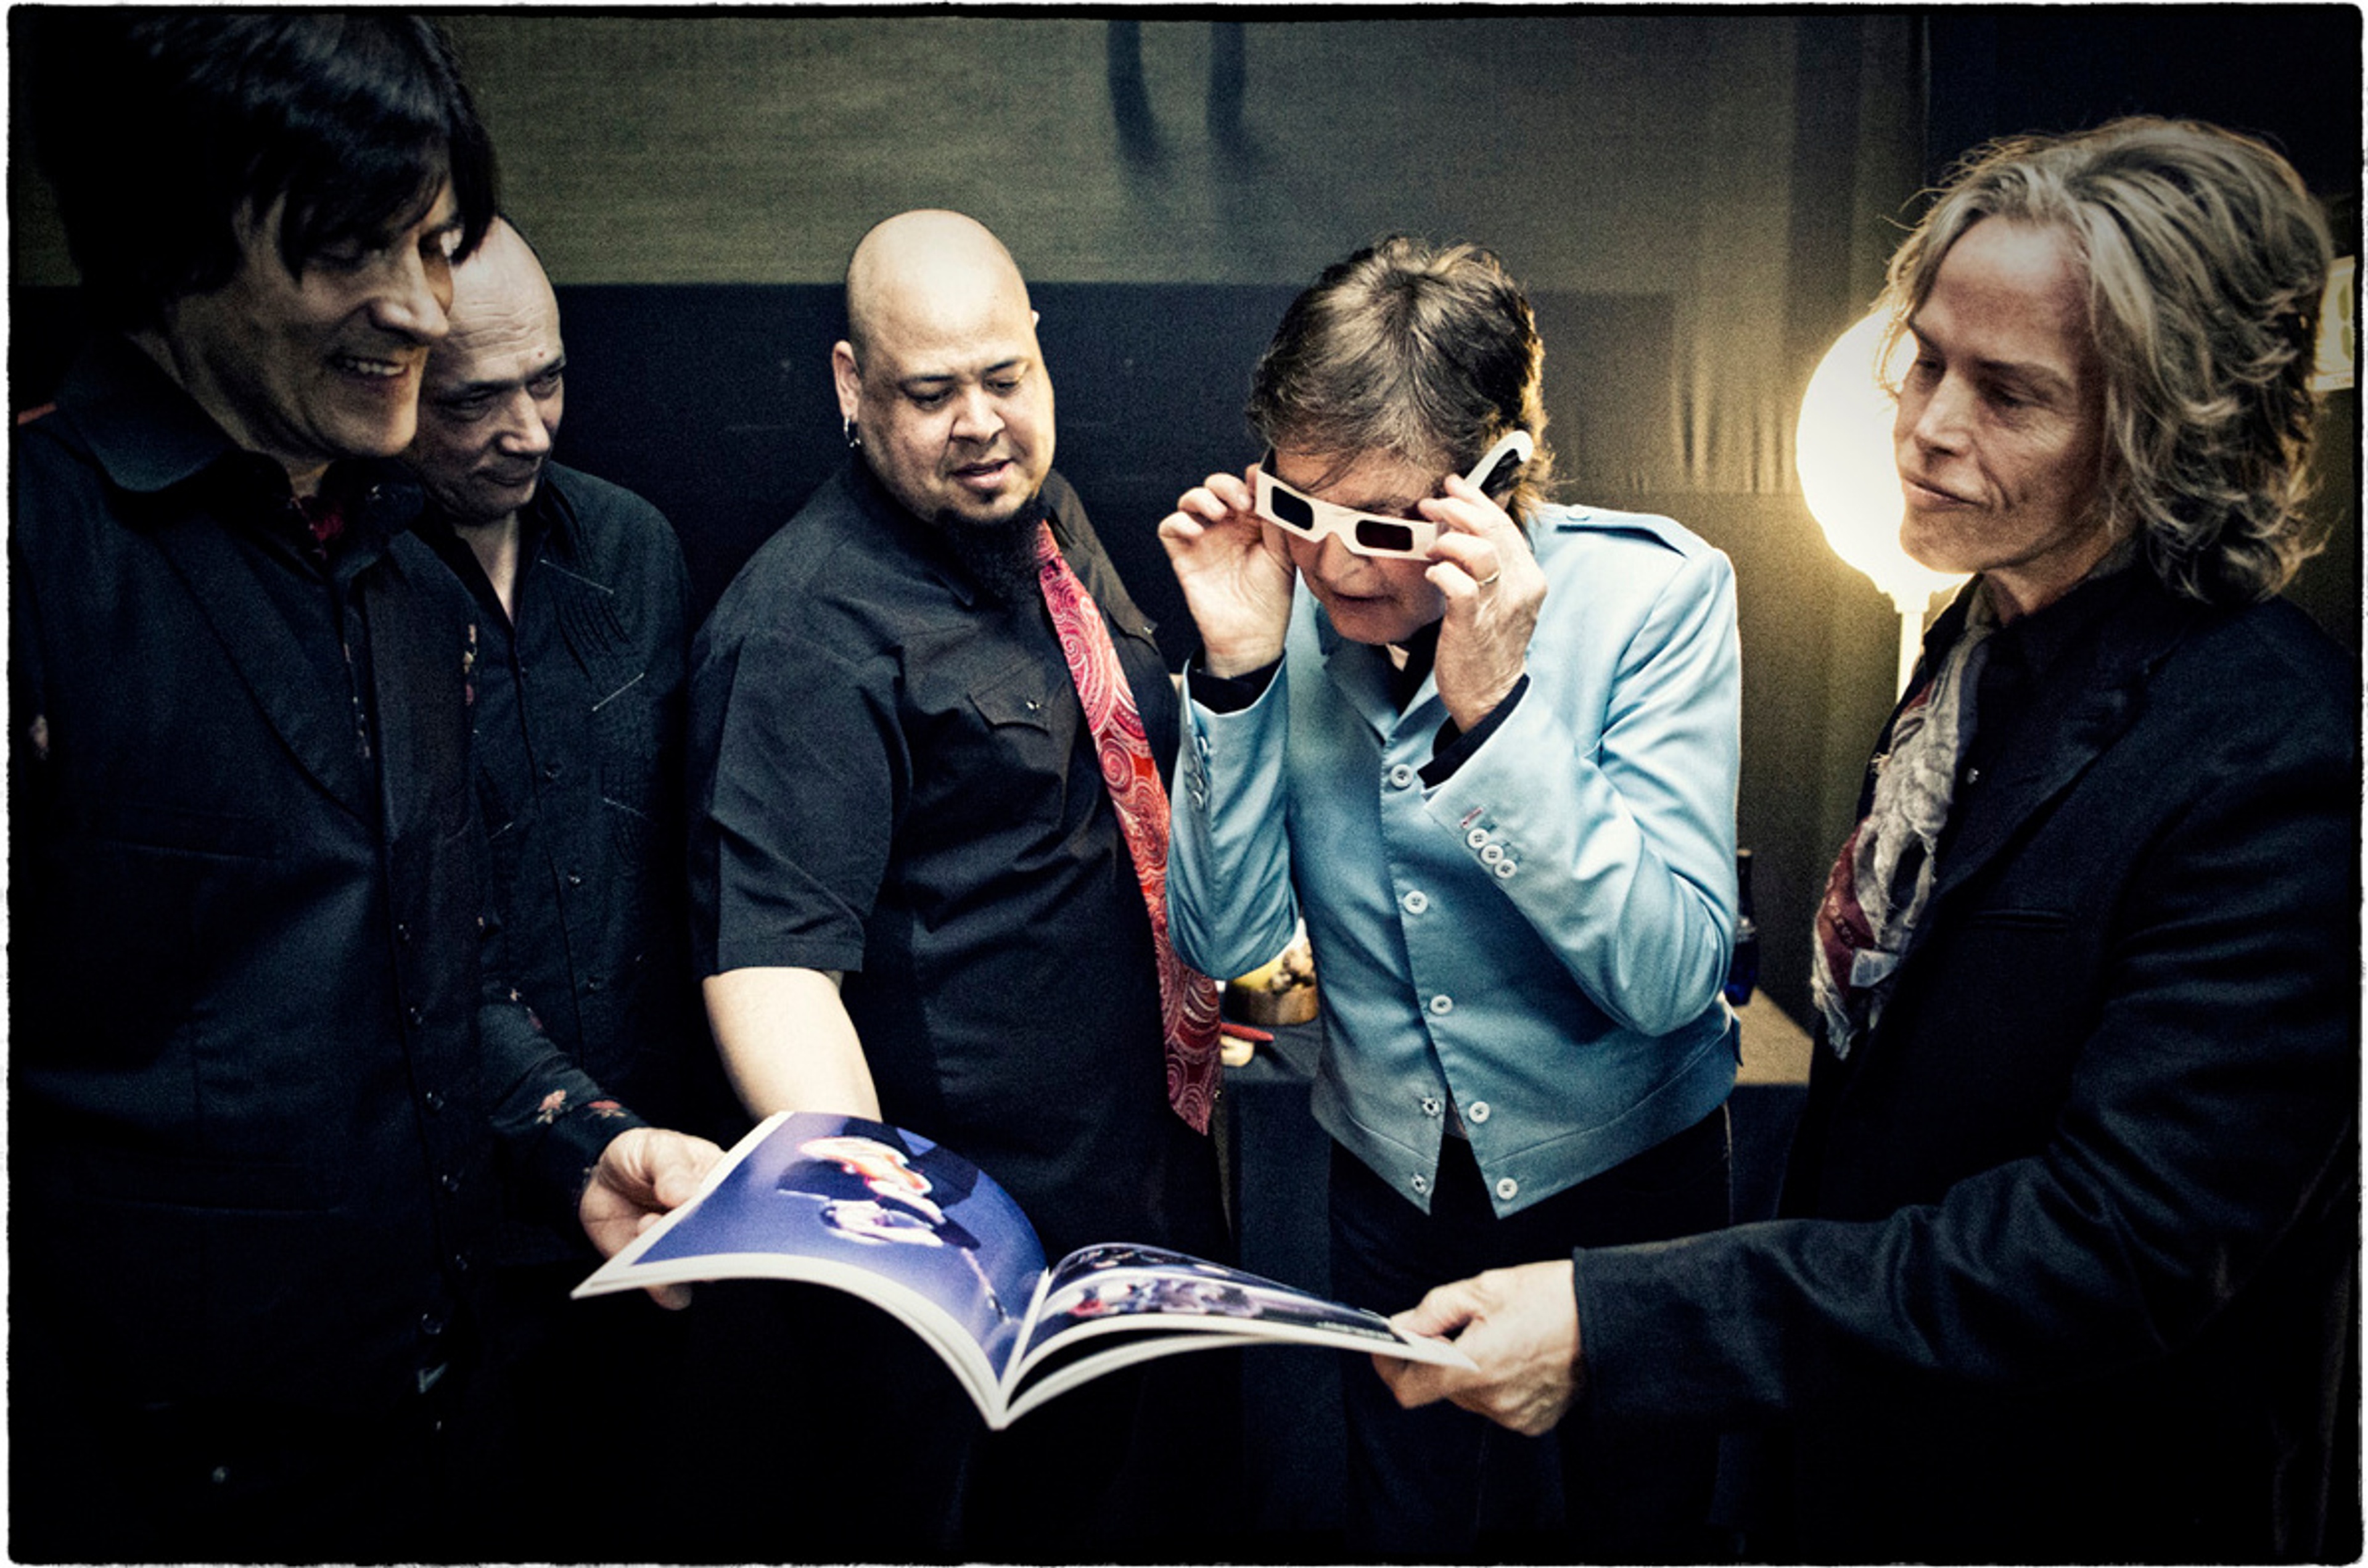 Rusty, Wix, Abe, Paul and Brian checking out the new tour programme, Belo Horizonte, Brazil, 4th May 2013